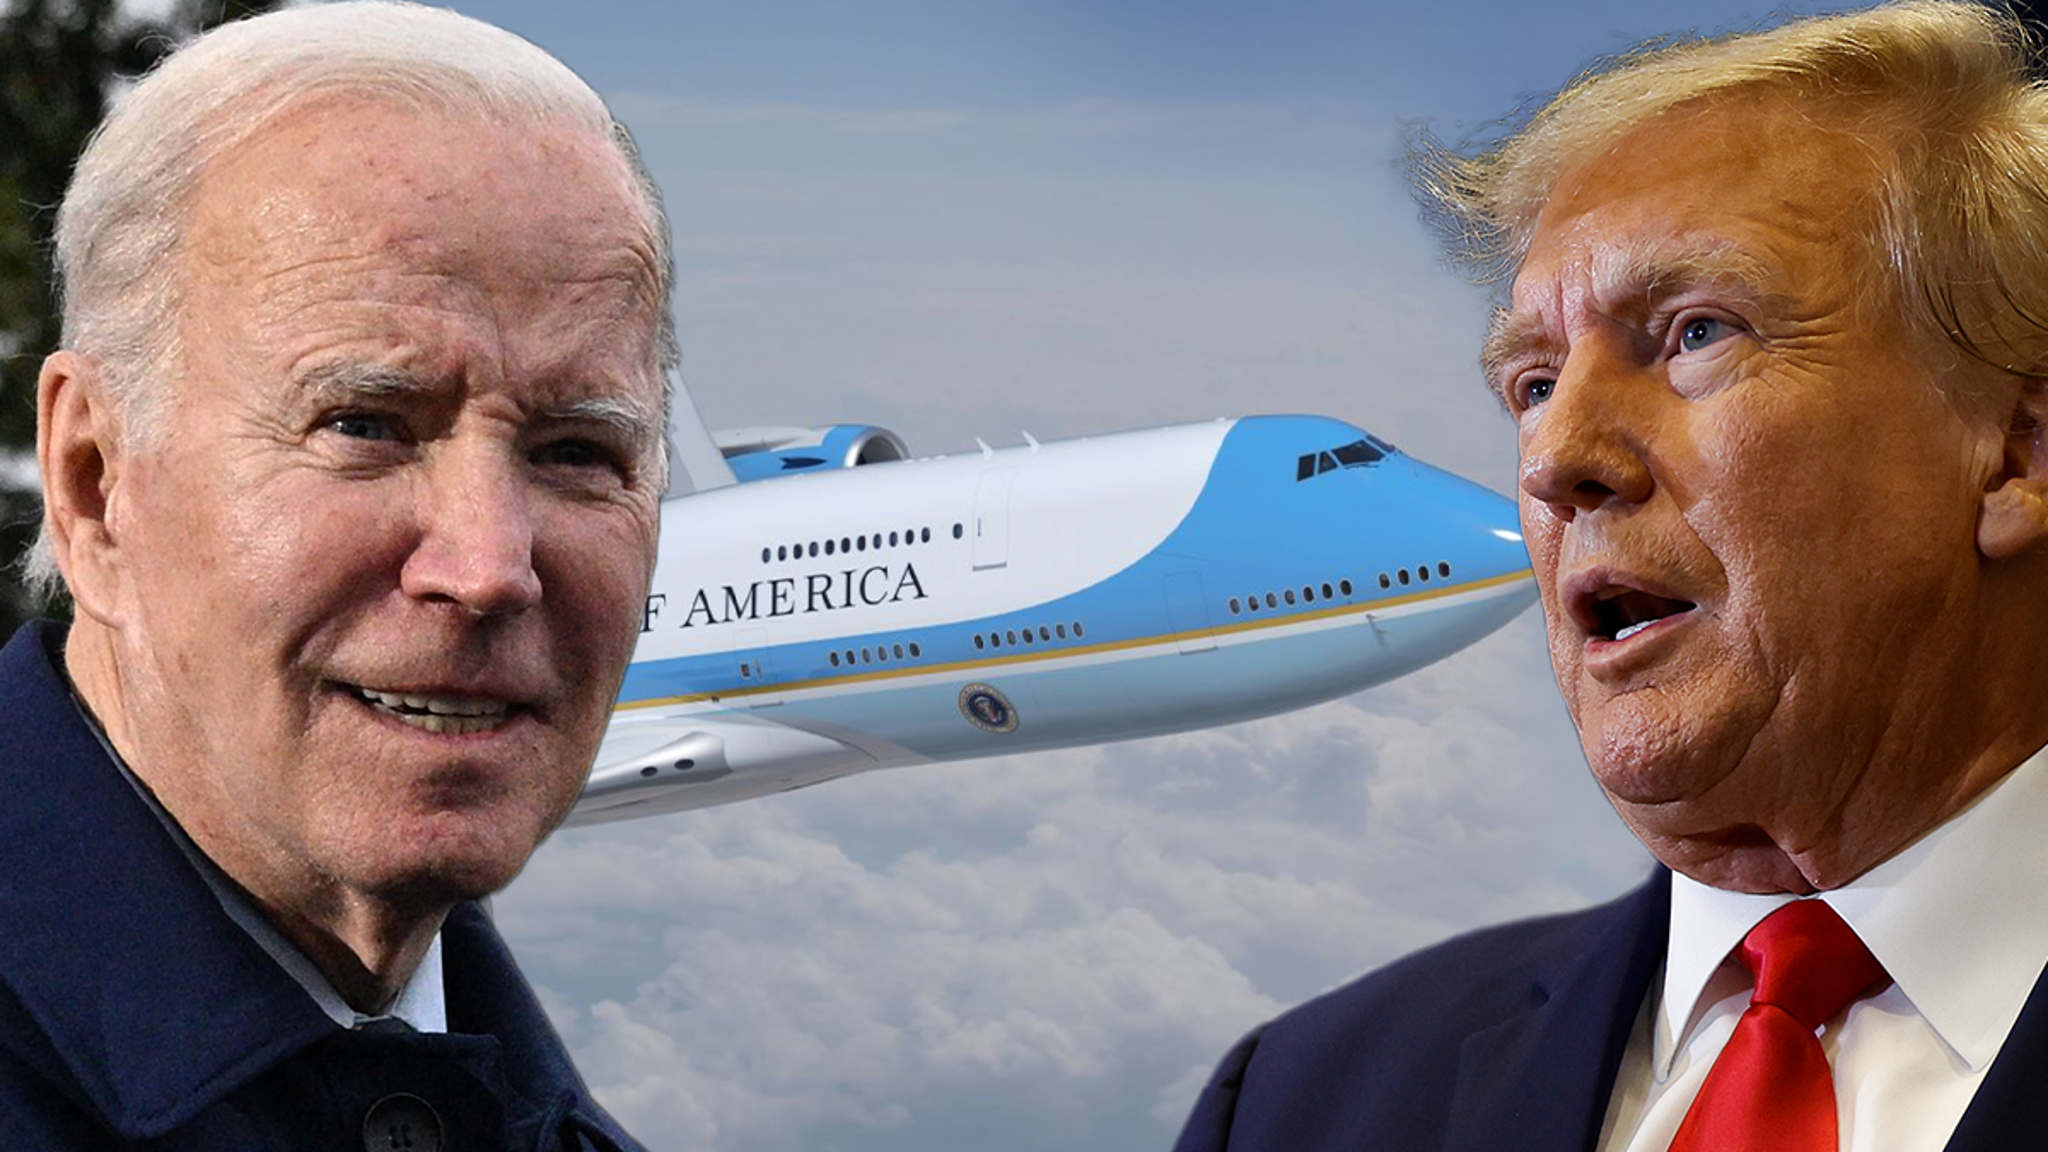 Biden Scraps Trump’s Design for Air Force One, Opts for Classic Colors